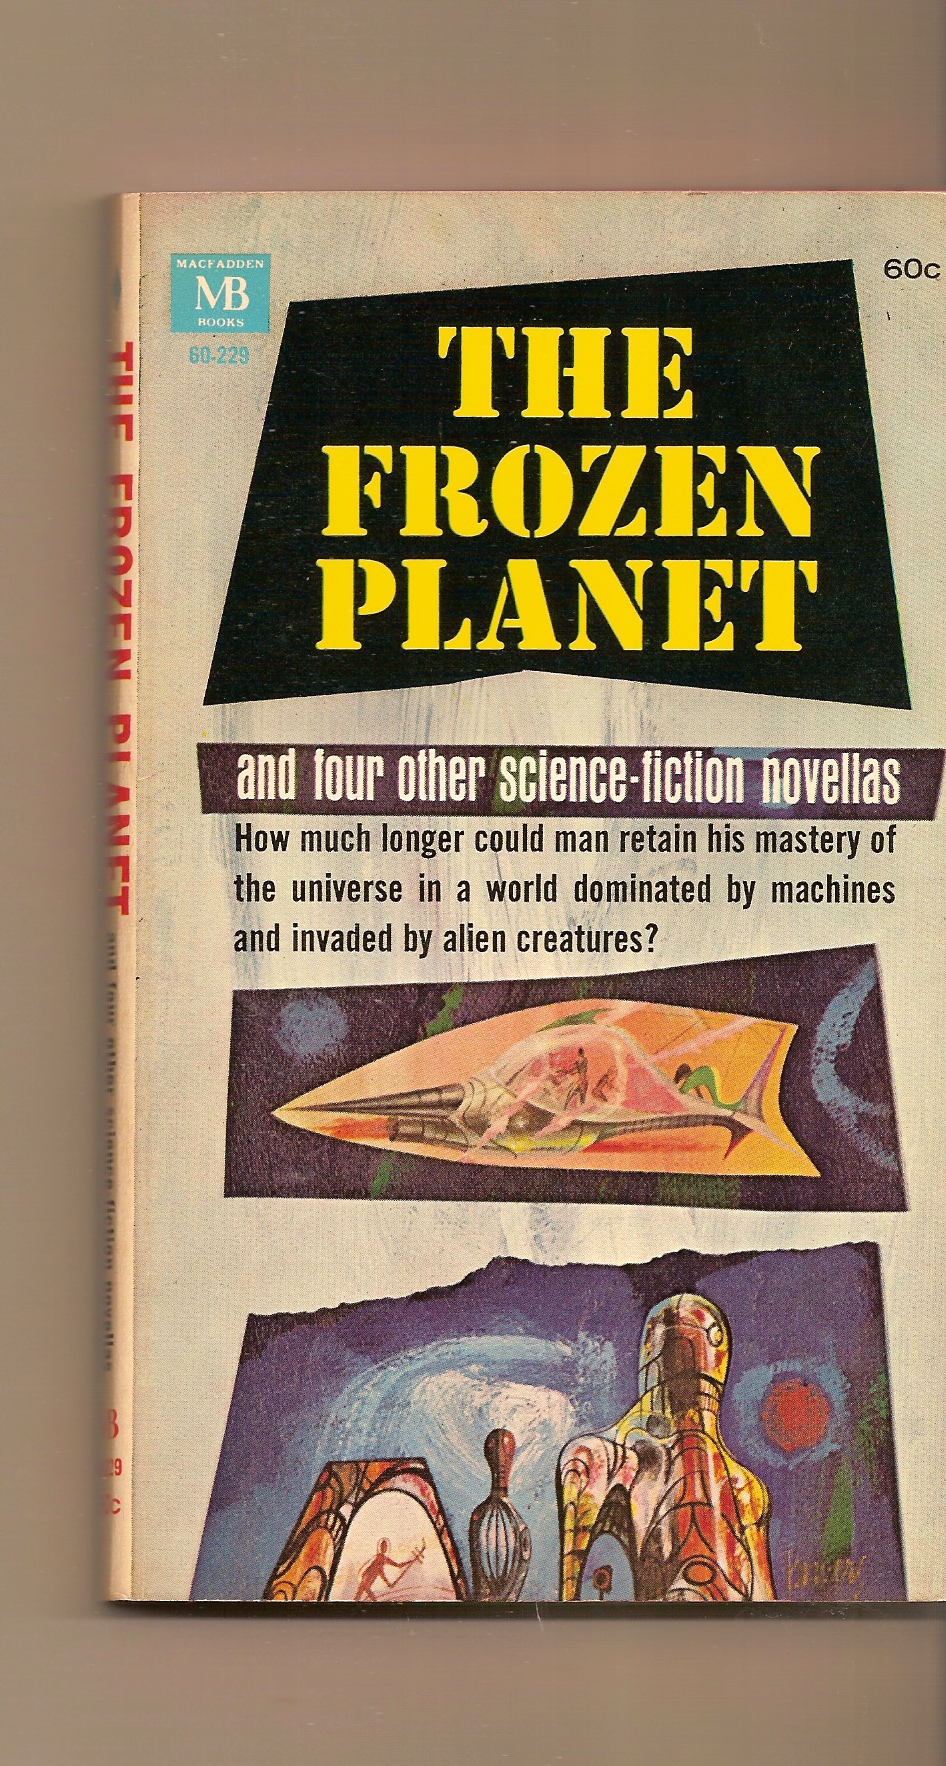 LAUMER KEITH, F. L. WALLACE, ALLEN KIM LANG, DANIEL KEYES, CLIFFORD D. SIMAK - Frozen Planet, the - and Other Science Fiction Novellas